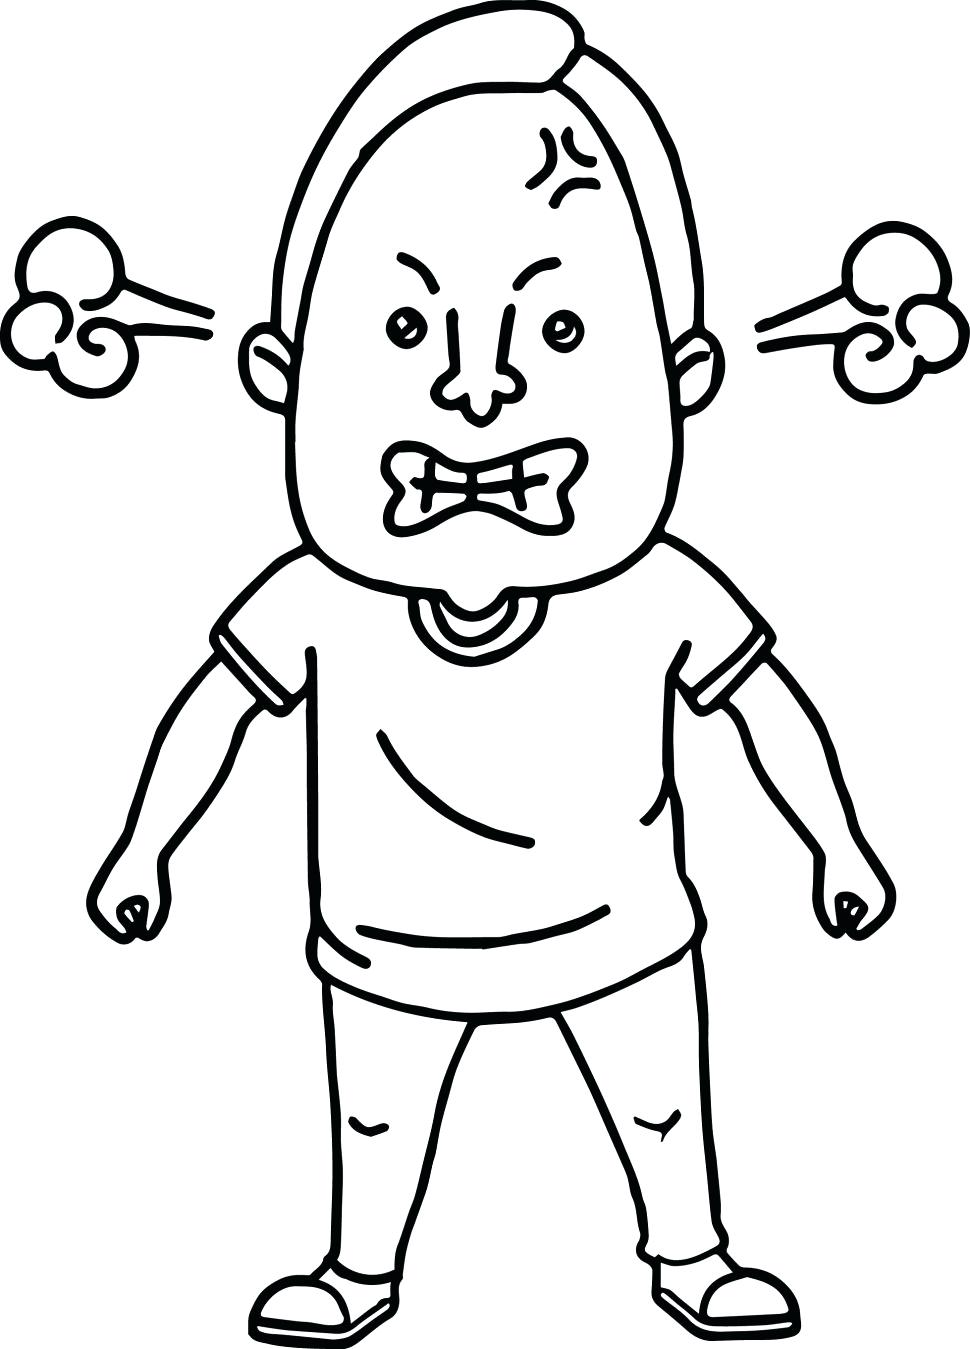 Angry Face Coloring Page at GetColorings.com | Free printable colorings ...